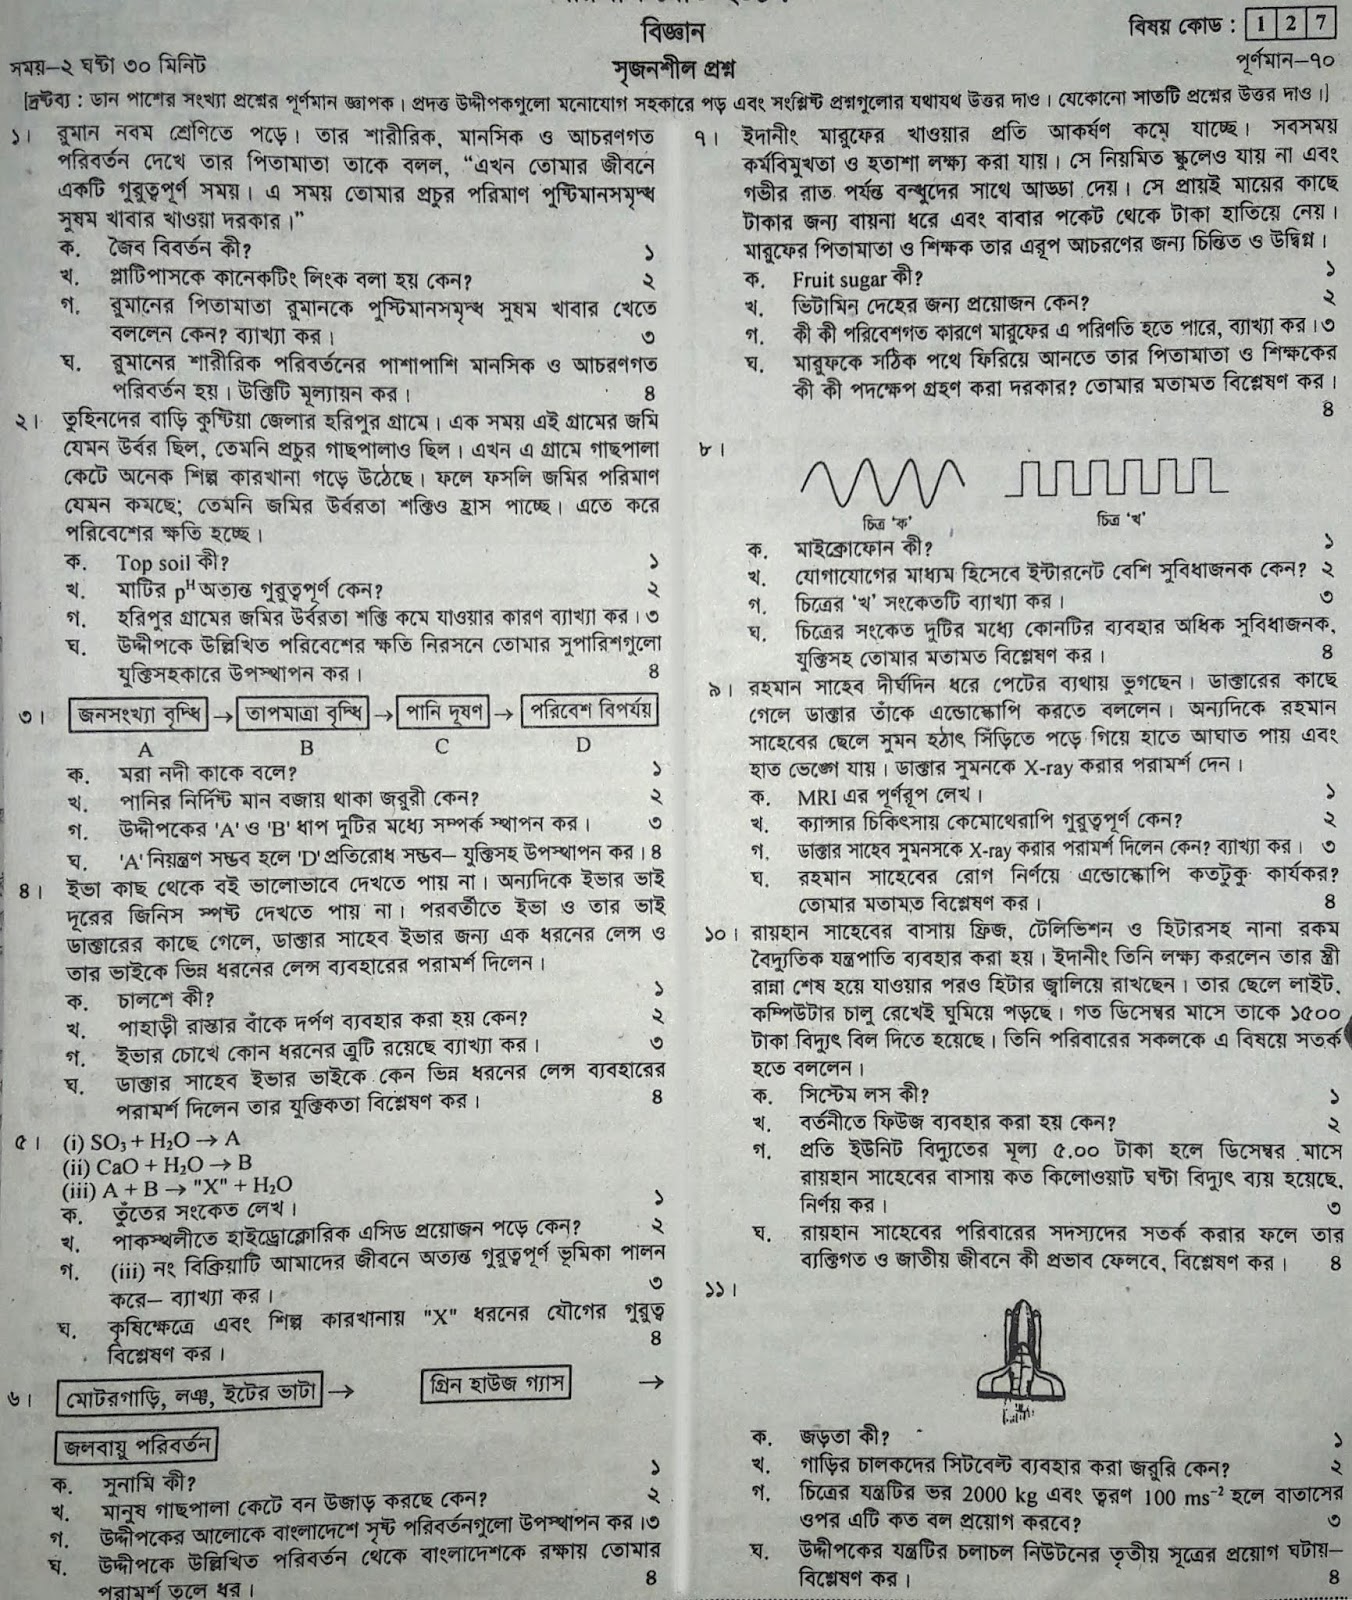 SSC General Science suggestion, question paper, model question, mcq question, question pattern, syllabus for dhaka board, all boards